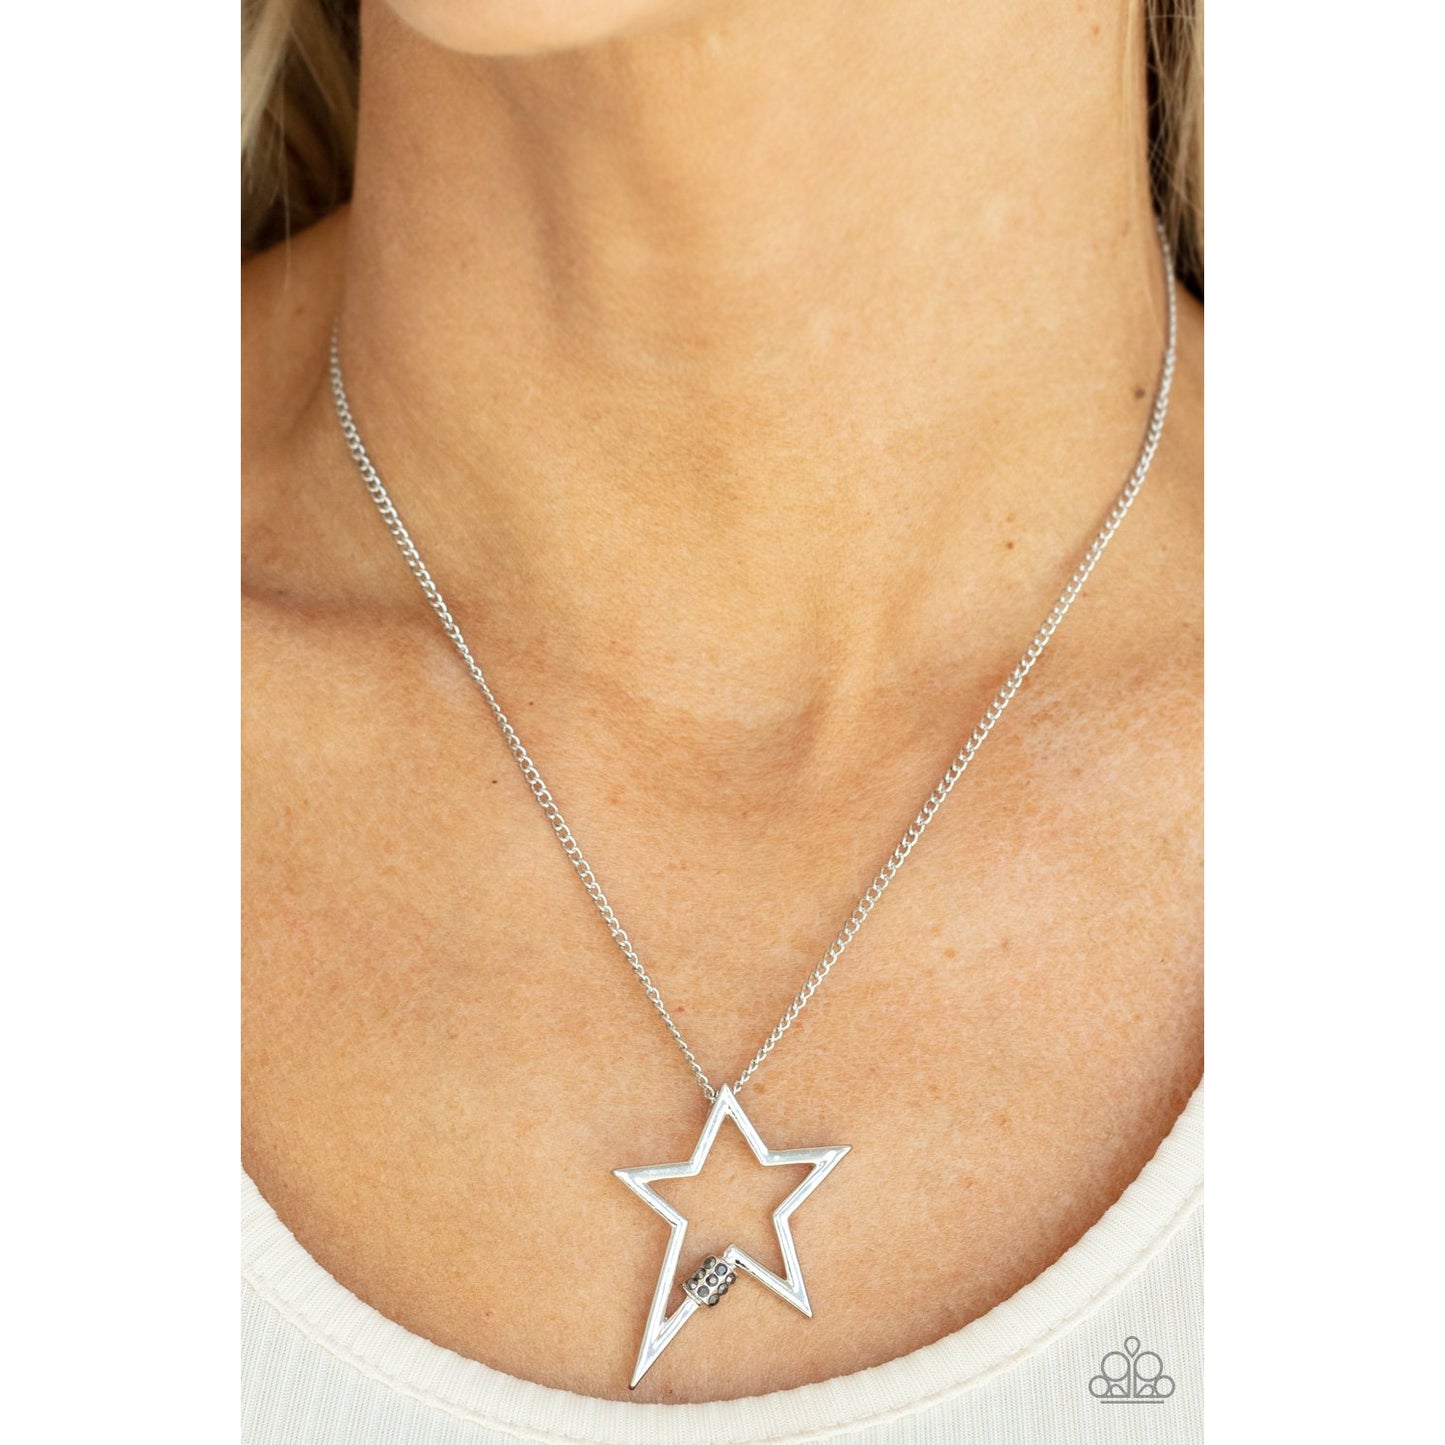 Light Up The Sky - Silver Necklace - Paparazzi Accessories - GlaMarous Titi Jewels